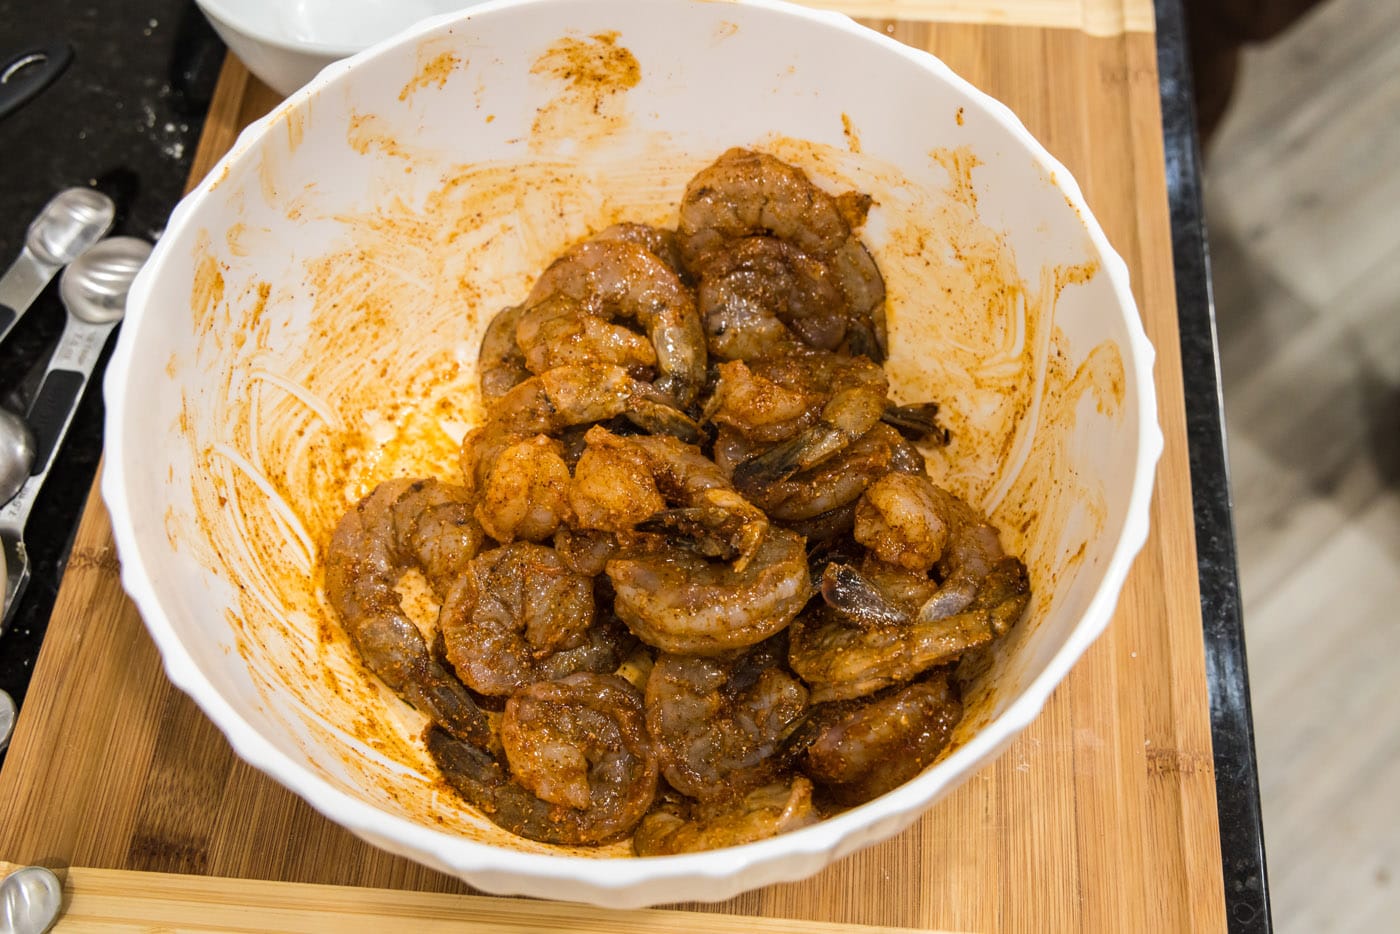 shrimp tossed in cayenne pepper, chili powder, and paprika